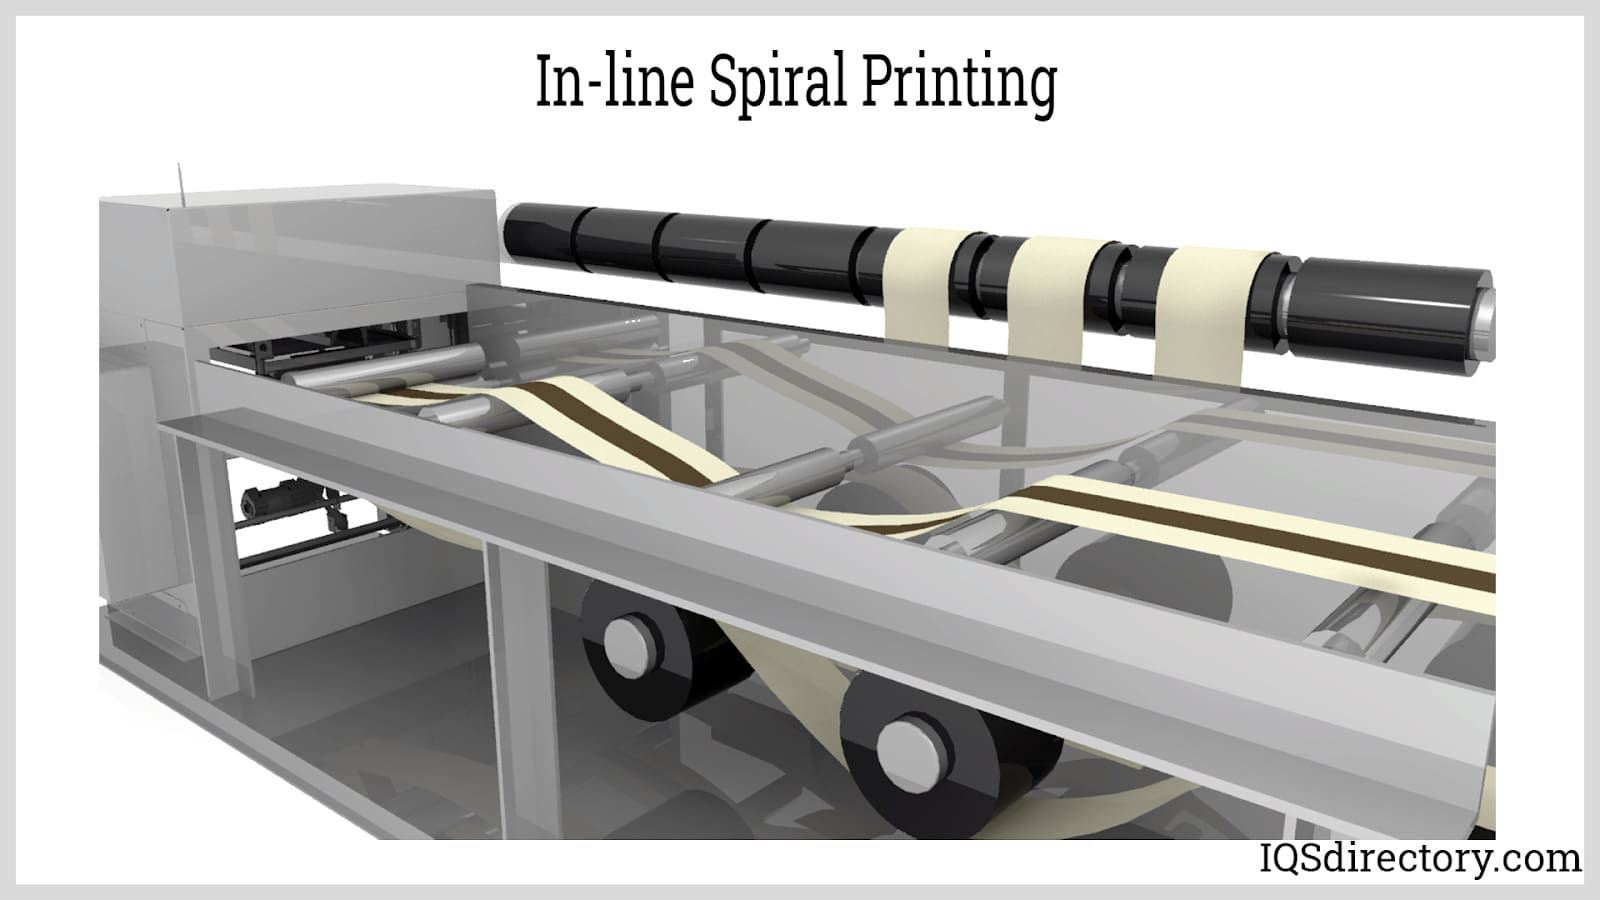 In-line Spiral Printing